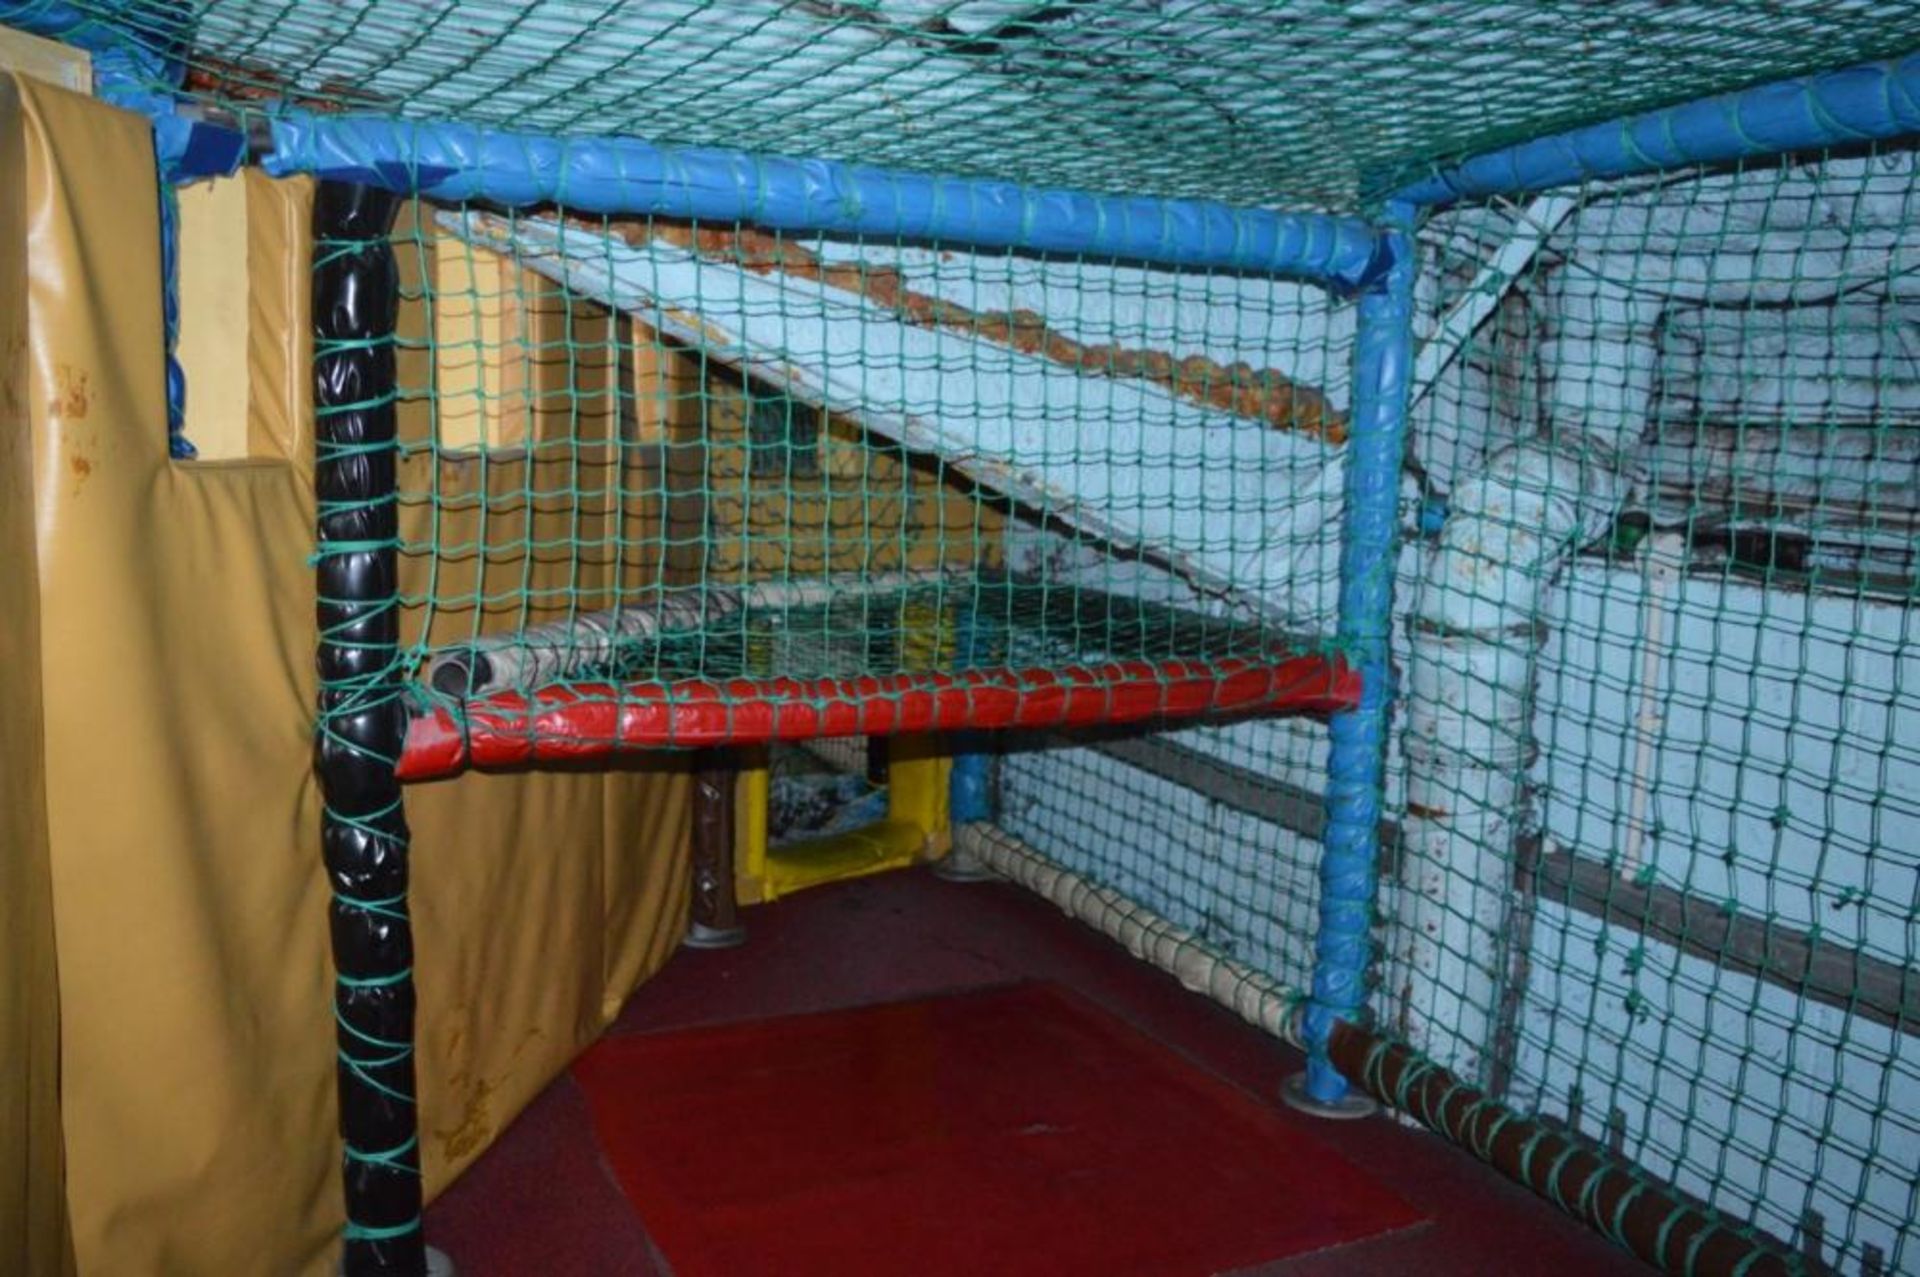 1 x Large Amount of Playcentre Safety Padding and Netting - Includes Lots of Various Designs and - Image 2 of 25